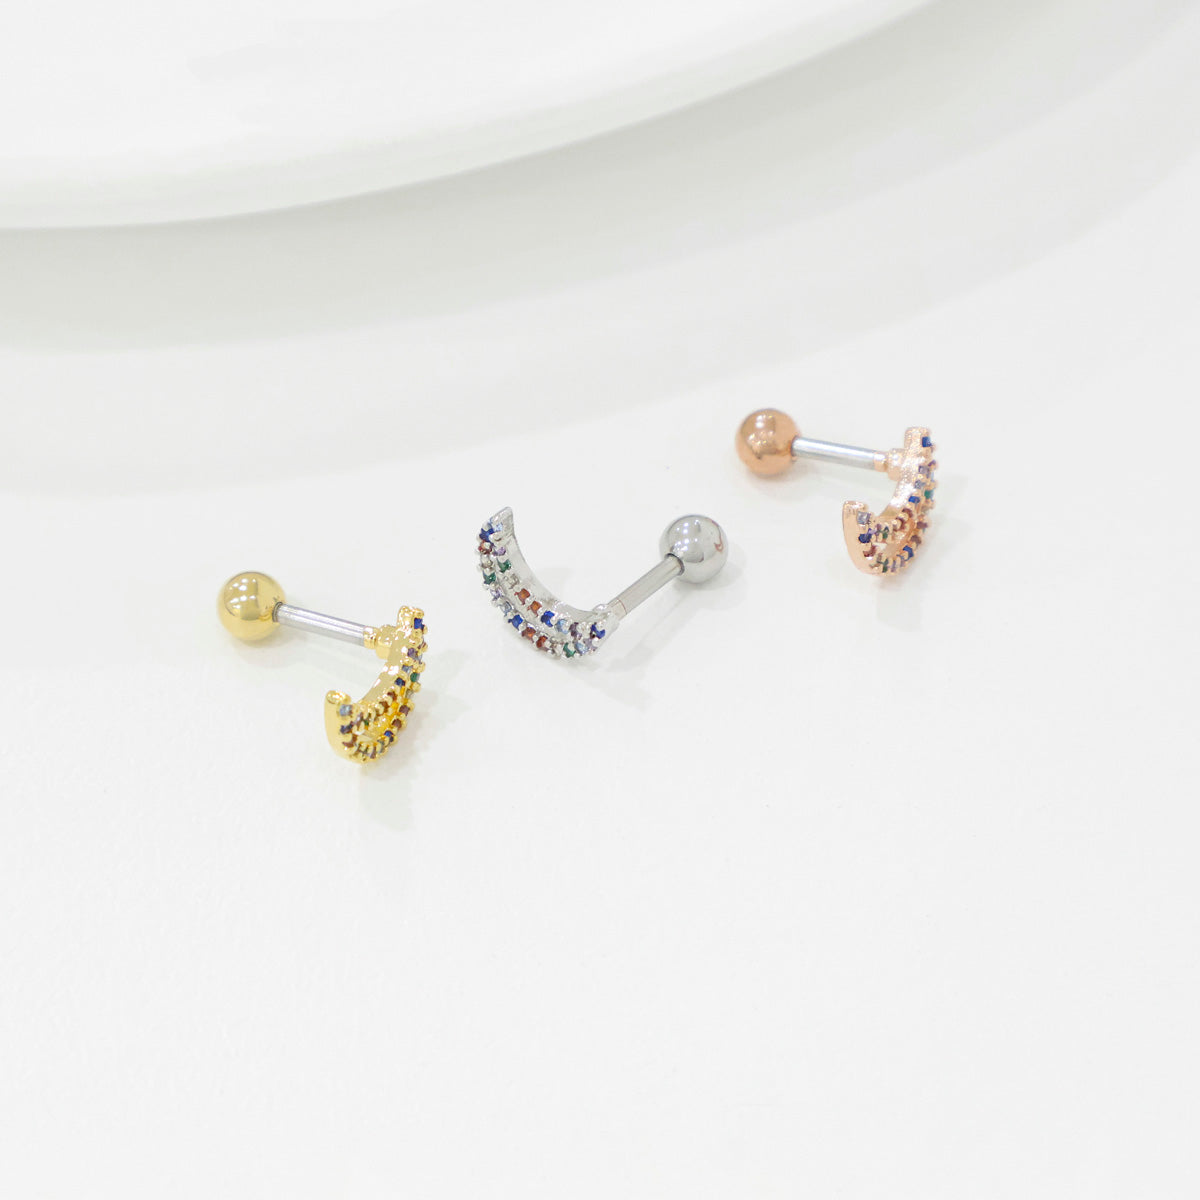 Rainbow cubic color setting crescent moon Surgical Steel screw back ball Cartilage earrings, Cubic star Barbells Ear Piercing, Cartilage Piercing